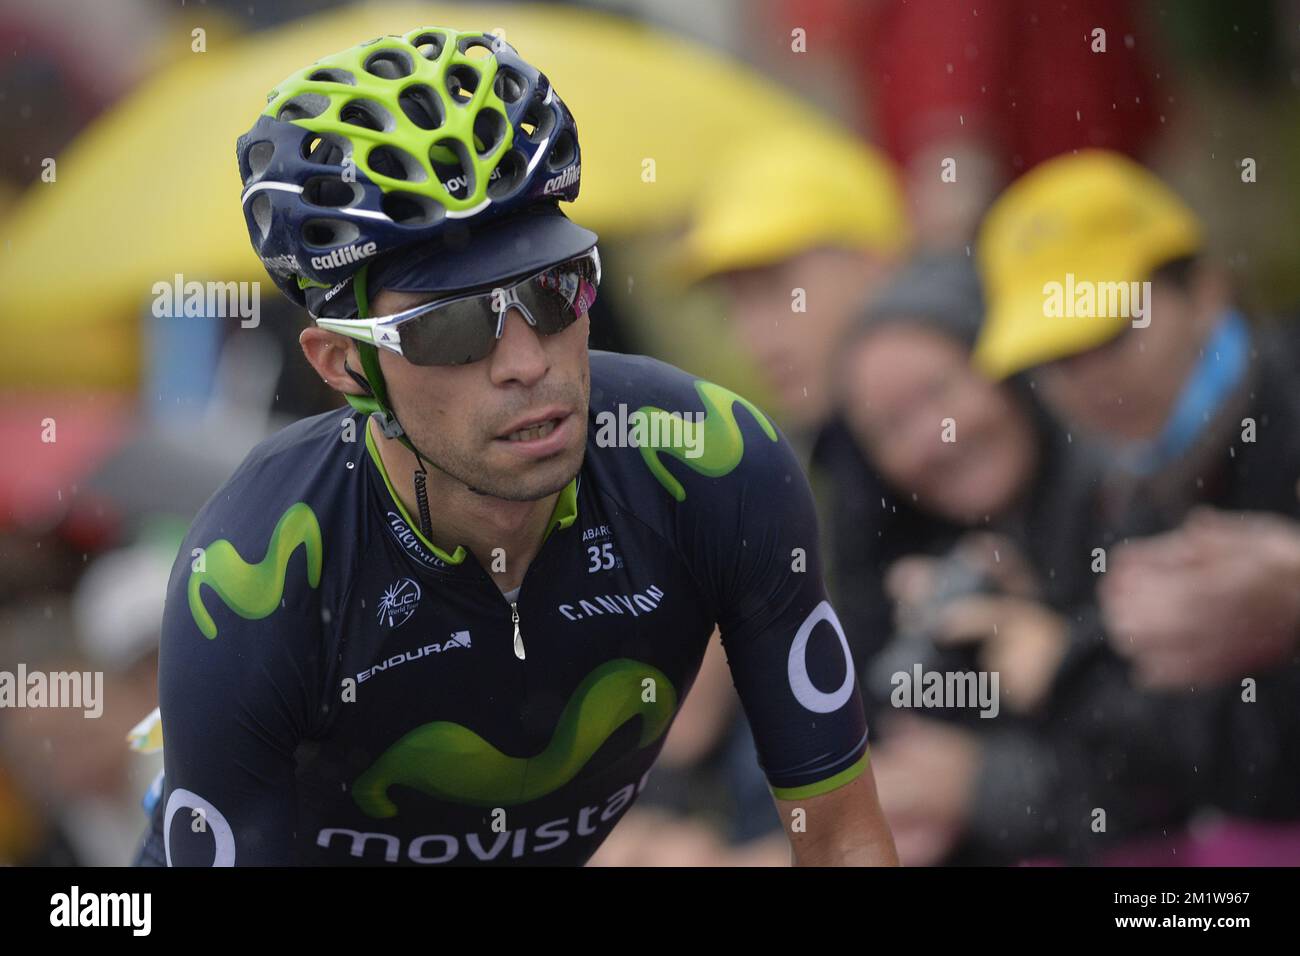 Italian Giovanni Visconti of Movistar Team pictured in action during stage 8 of the 101st edition of the Tour de France cycling race, 161 km from Tomblaine to Gerardmer, on Saturday 12 July 2014, in France.  Stock Photo